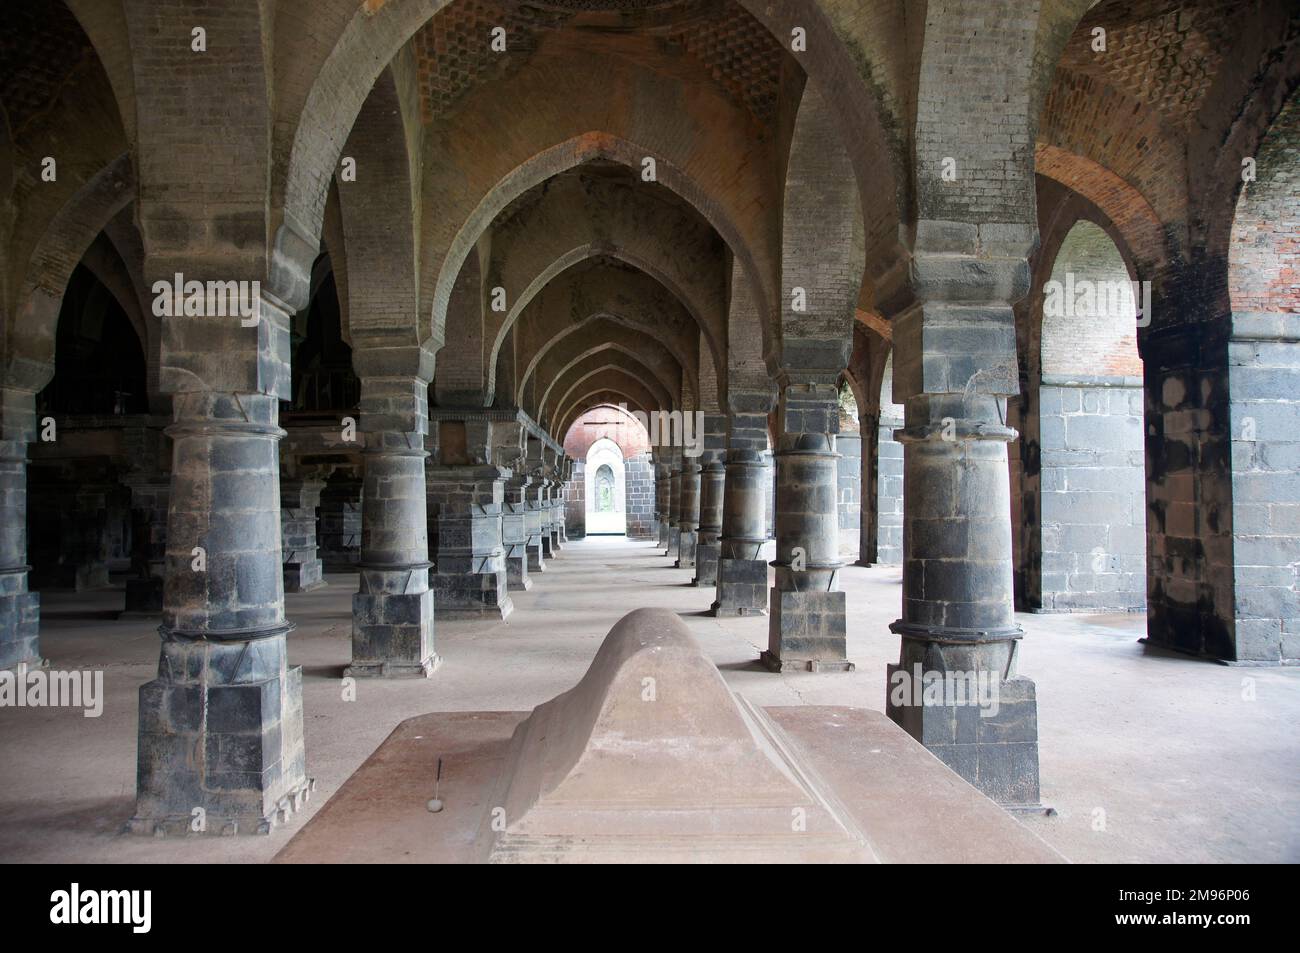 India, West Bengal, Pandua: Adina Mosque or Jami Masjid (1364 AD), innerior, arched nave, tomb. Stock Photo